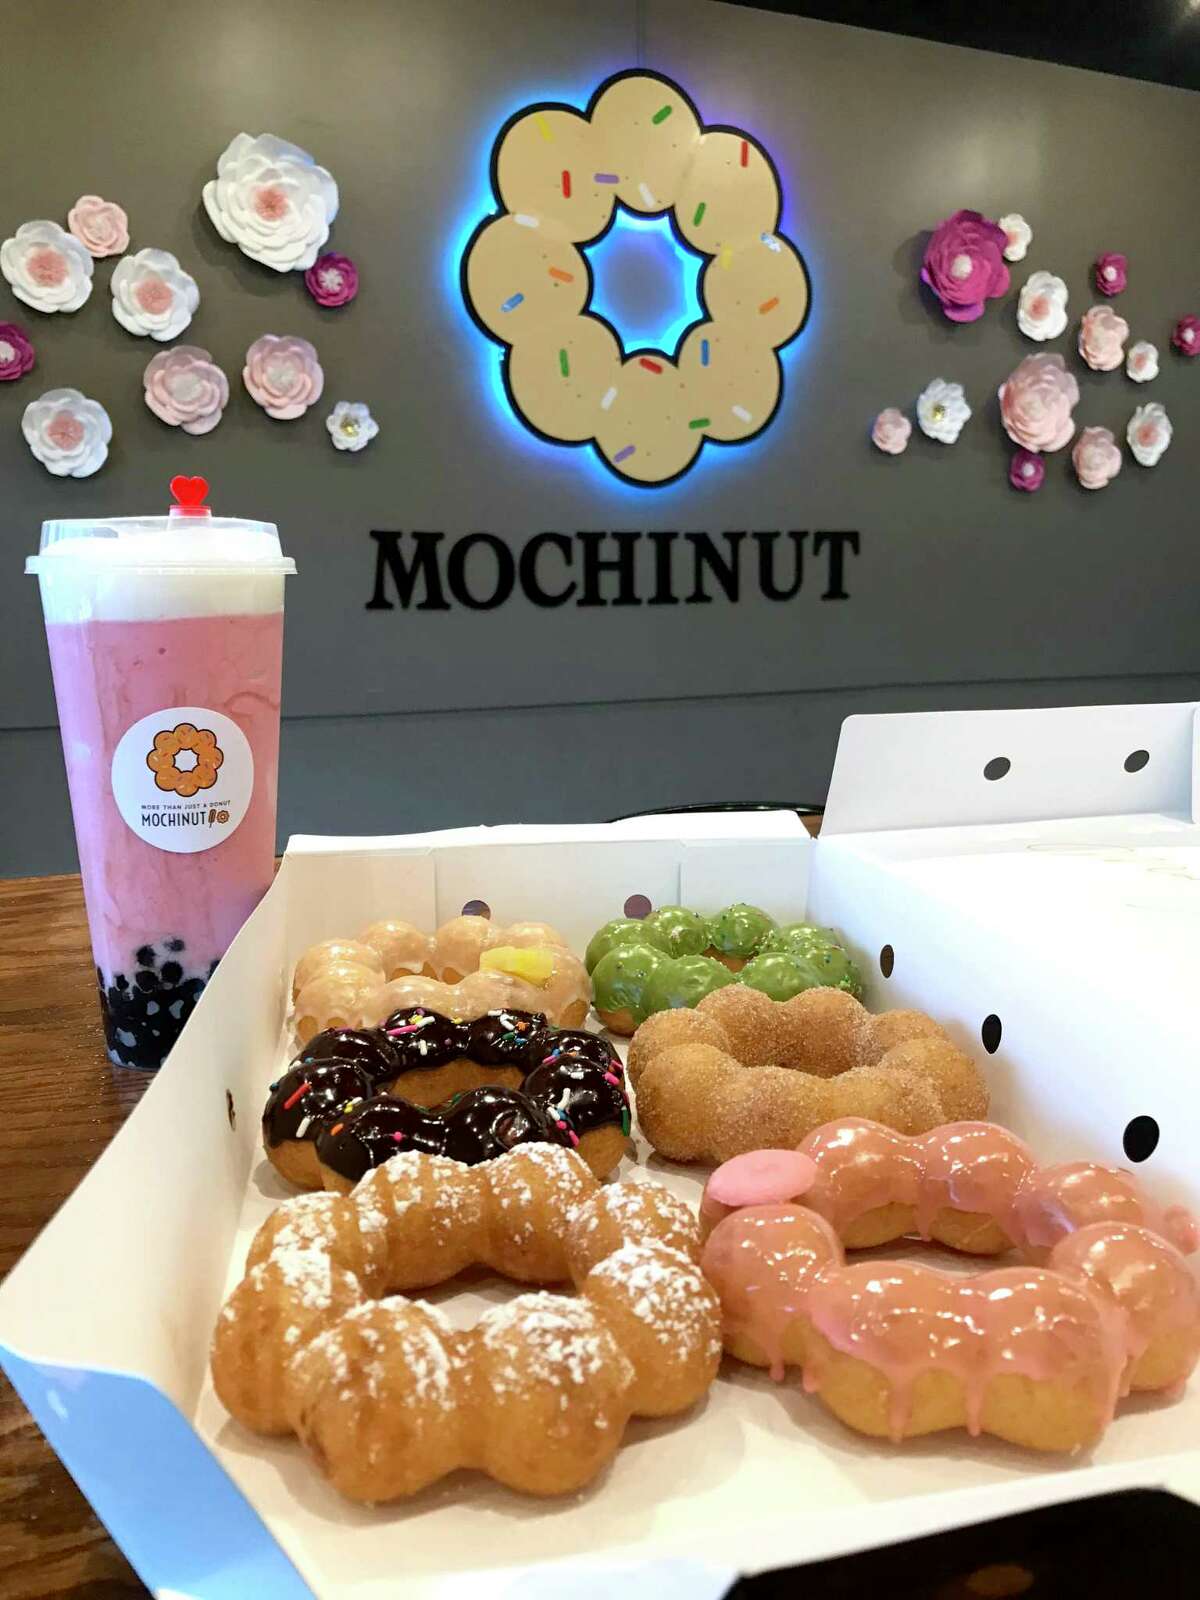 A selection of doughnuts and a strawberry cheese smoothie from Mochinut